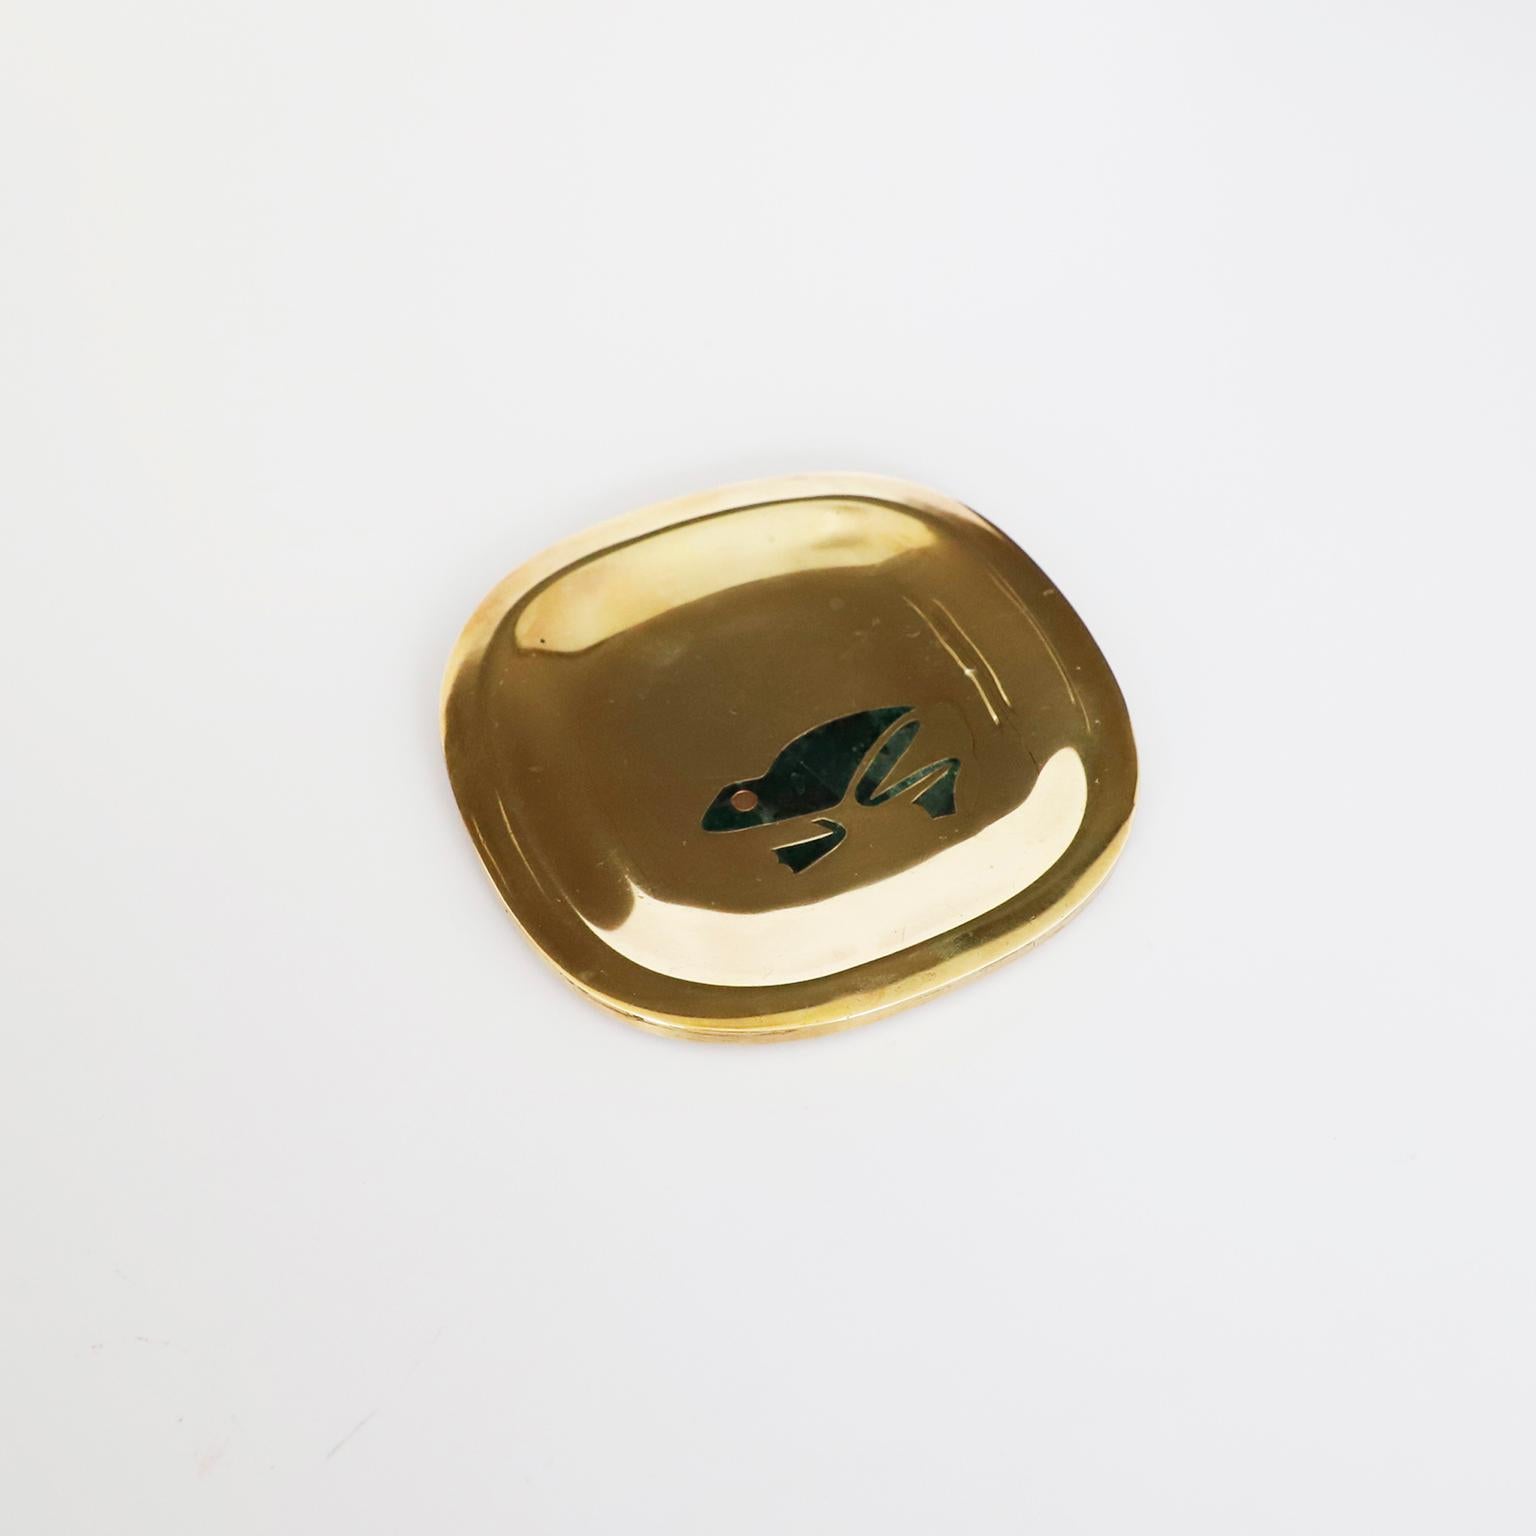 Mid-Century Modern Petite Brass Dish with Frog Motif by Los Castillo